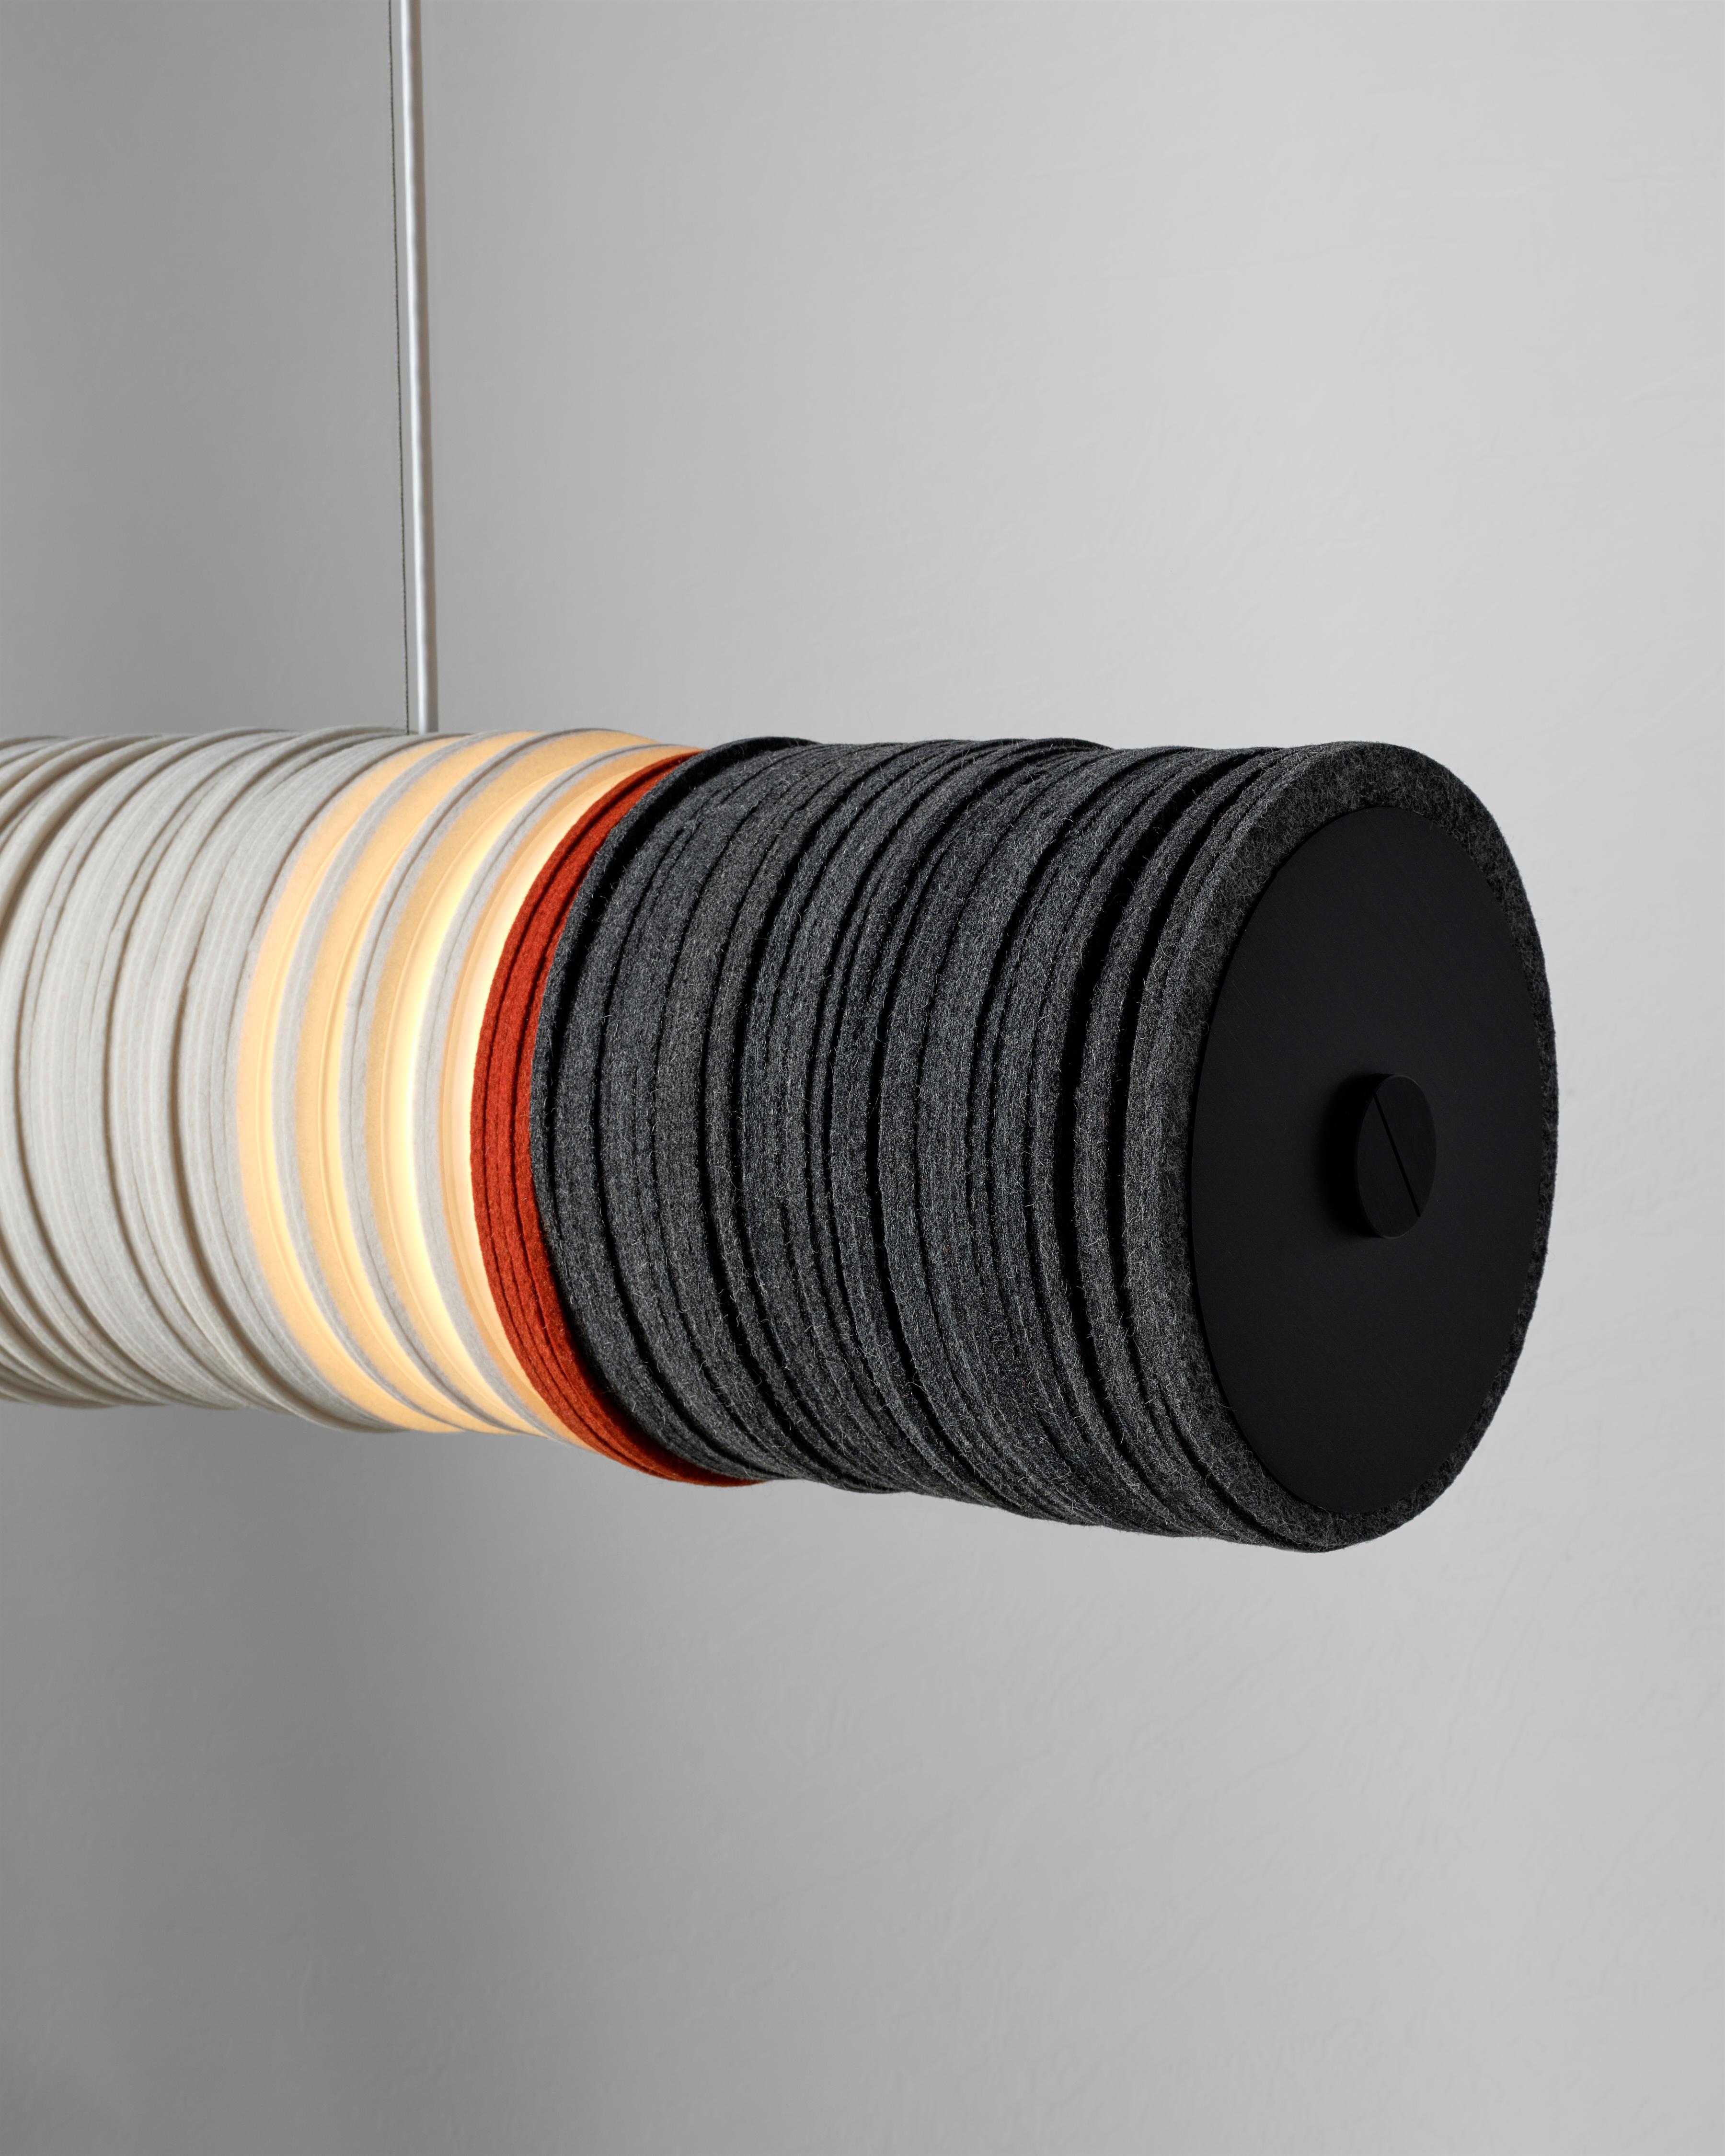 Canadian Contemporary Hanging Light in Felt, Sarah Coleman in Stackabl, Canada, 2022 For Sale